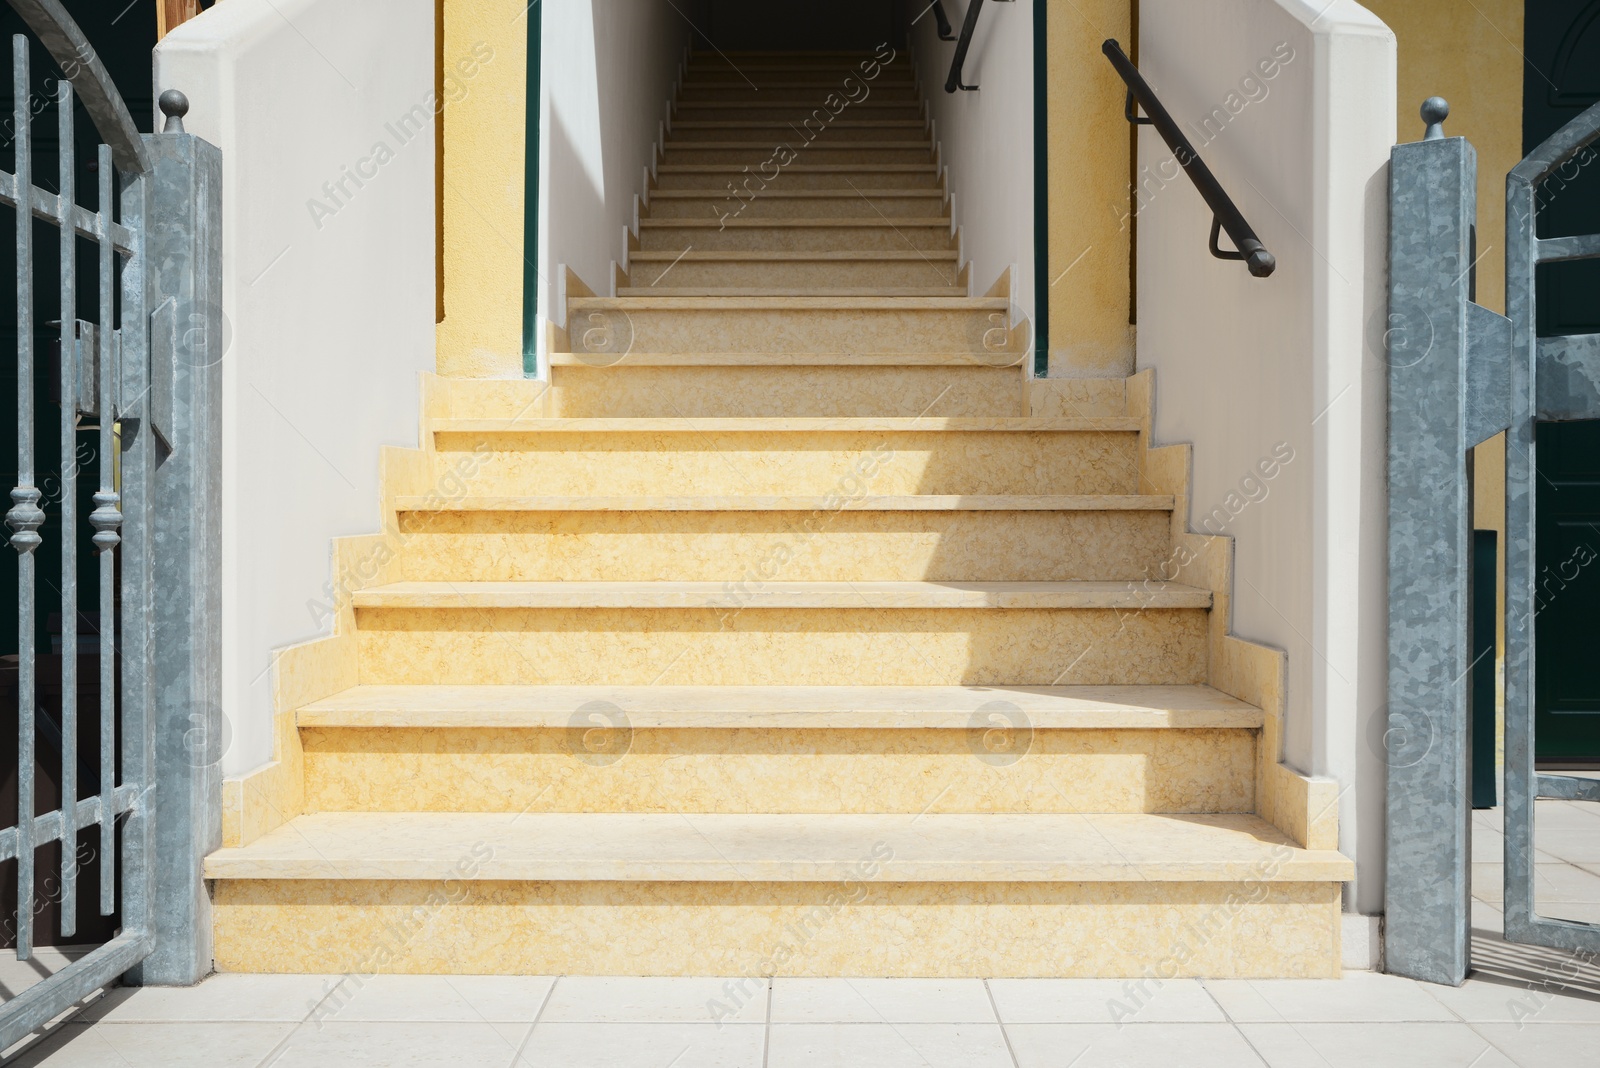 Photo of Stairs leading to entrance of house outdoors